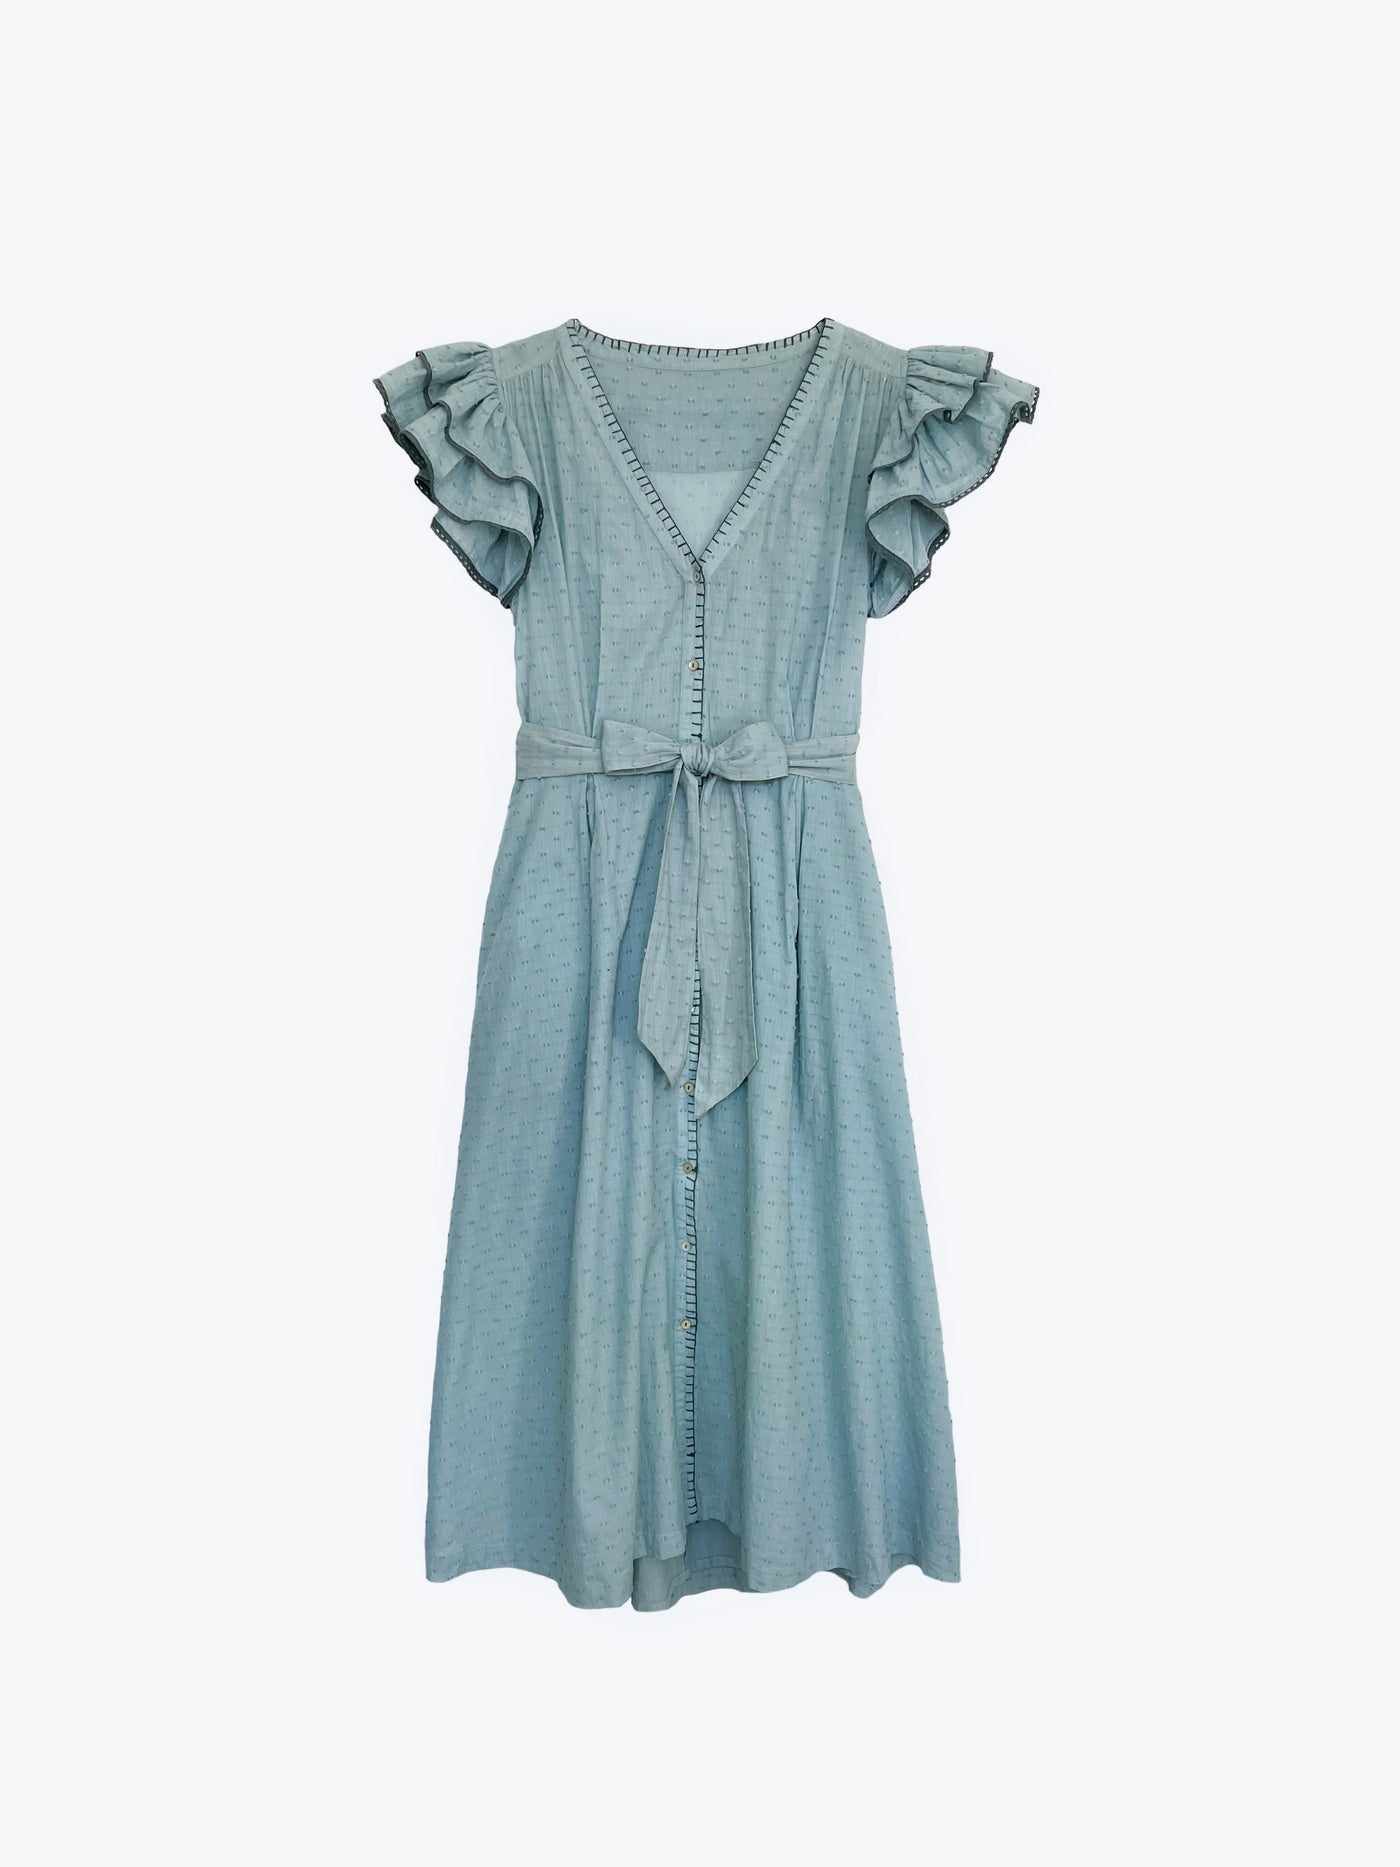 Product image of the Lilibet dress in pearl blue